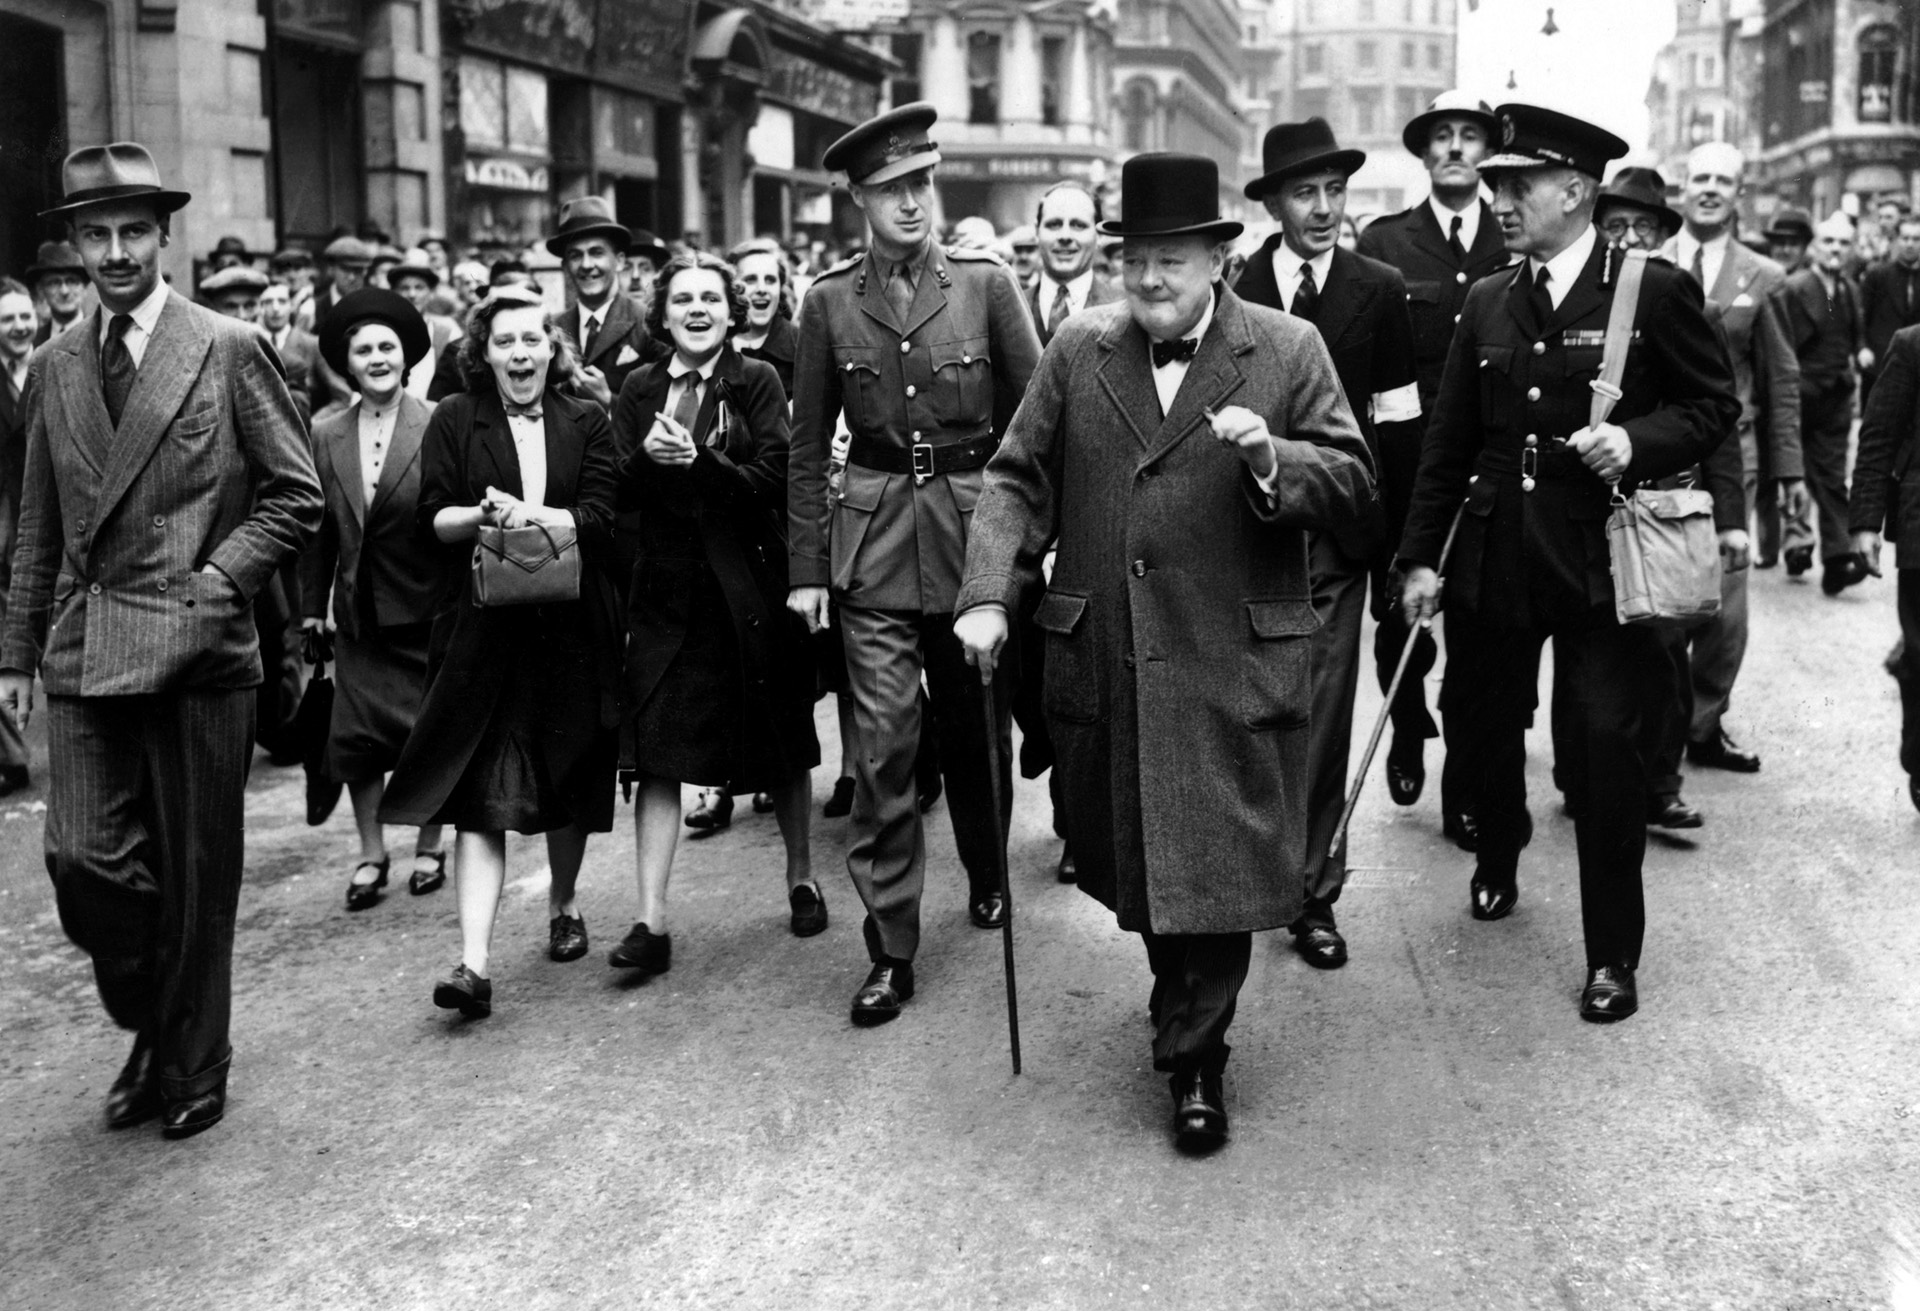 Prime Minister Winston Churchill, cheered on by his supporters, walks through East End streets in September 1940, to inspect damage and give Londoners “heart.”